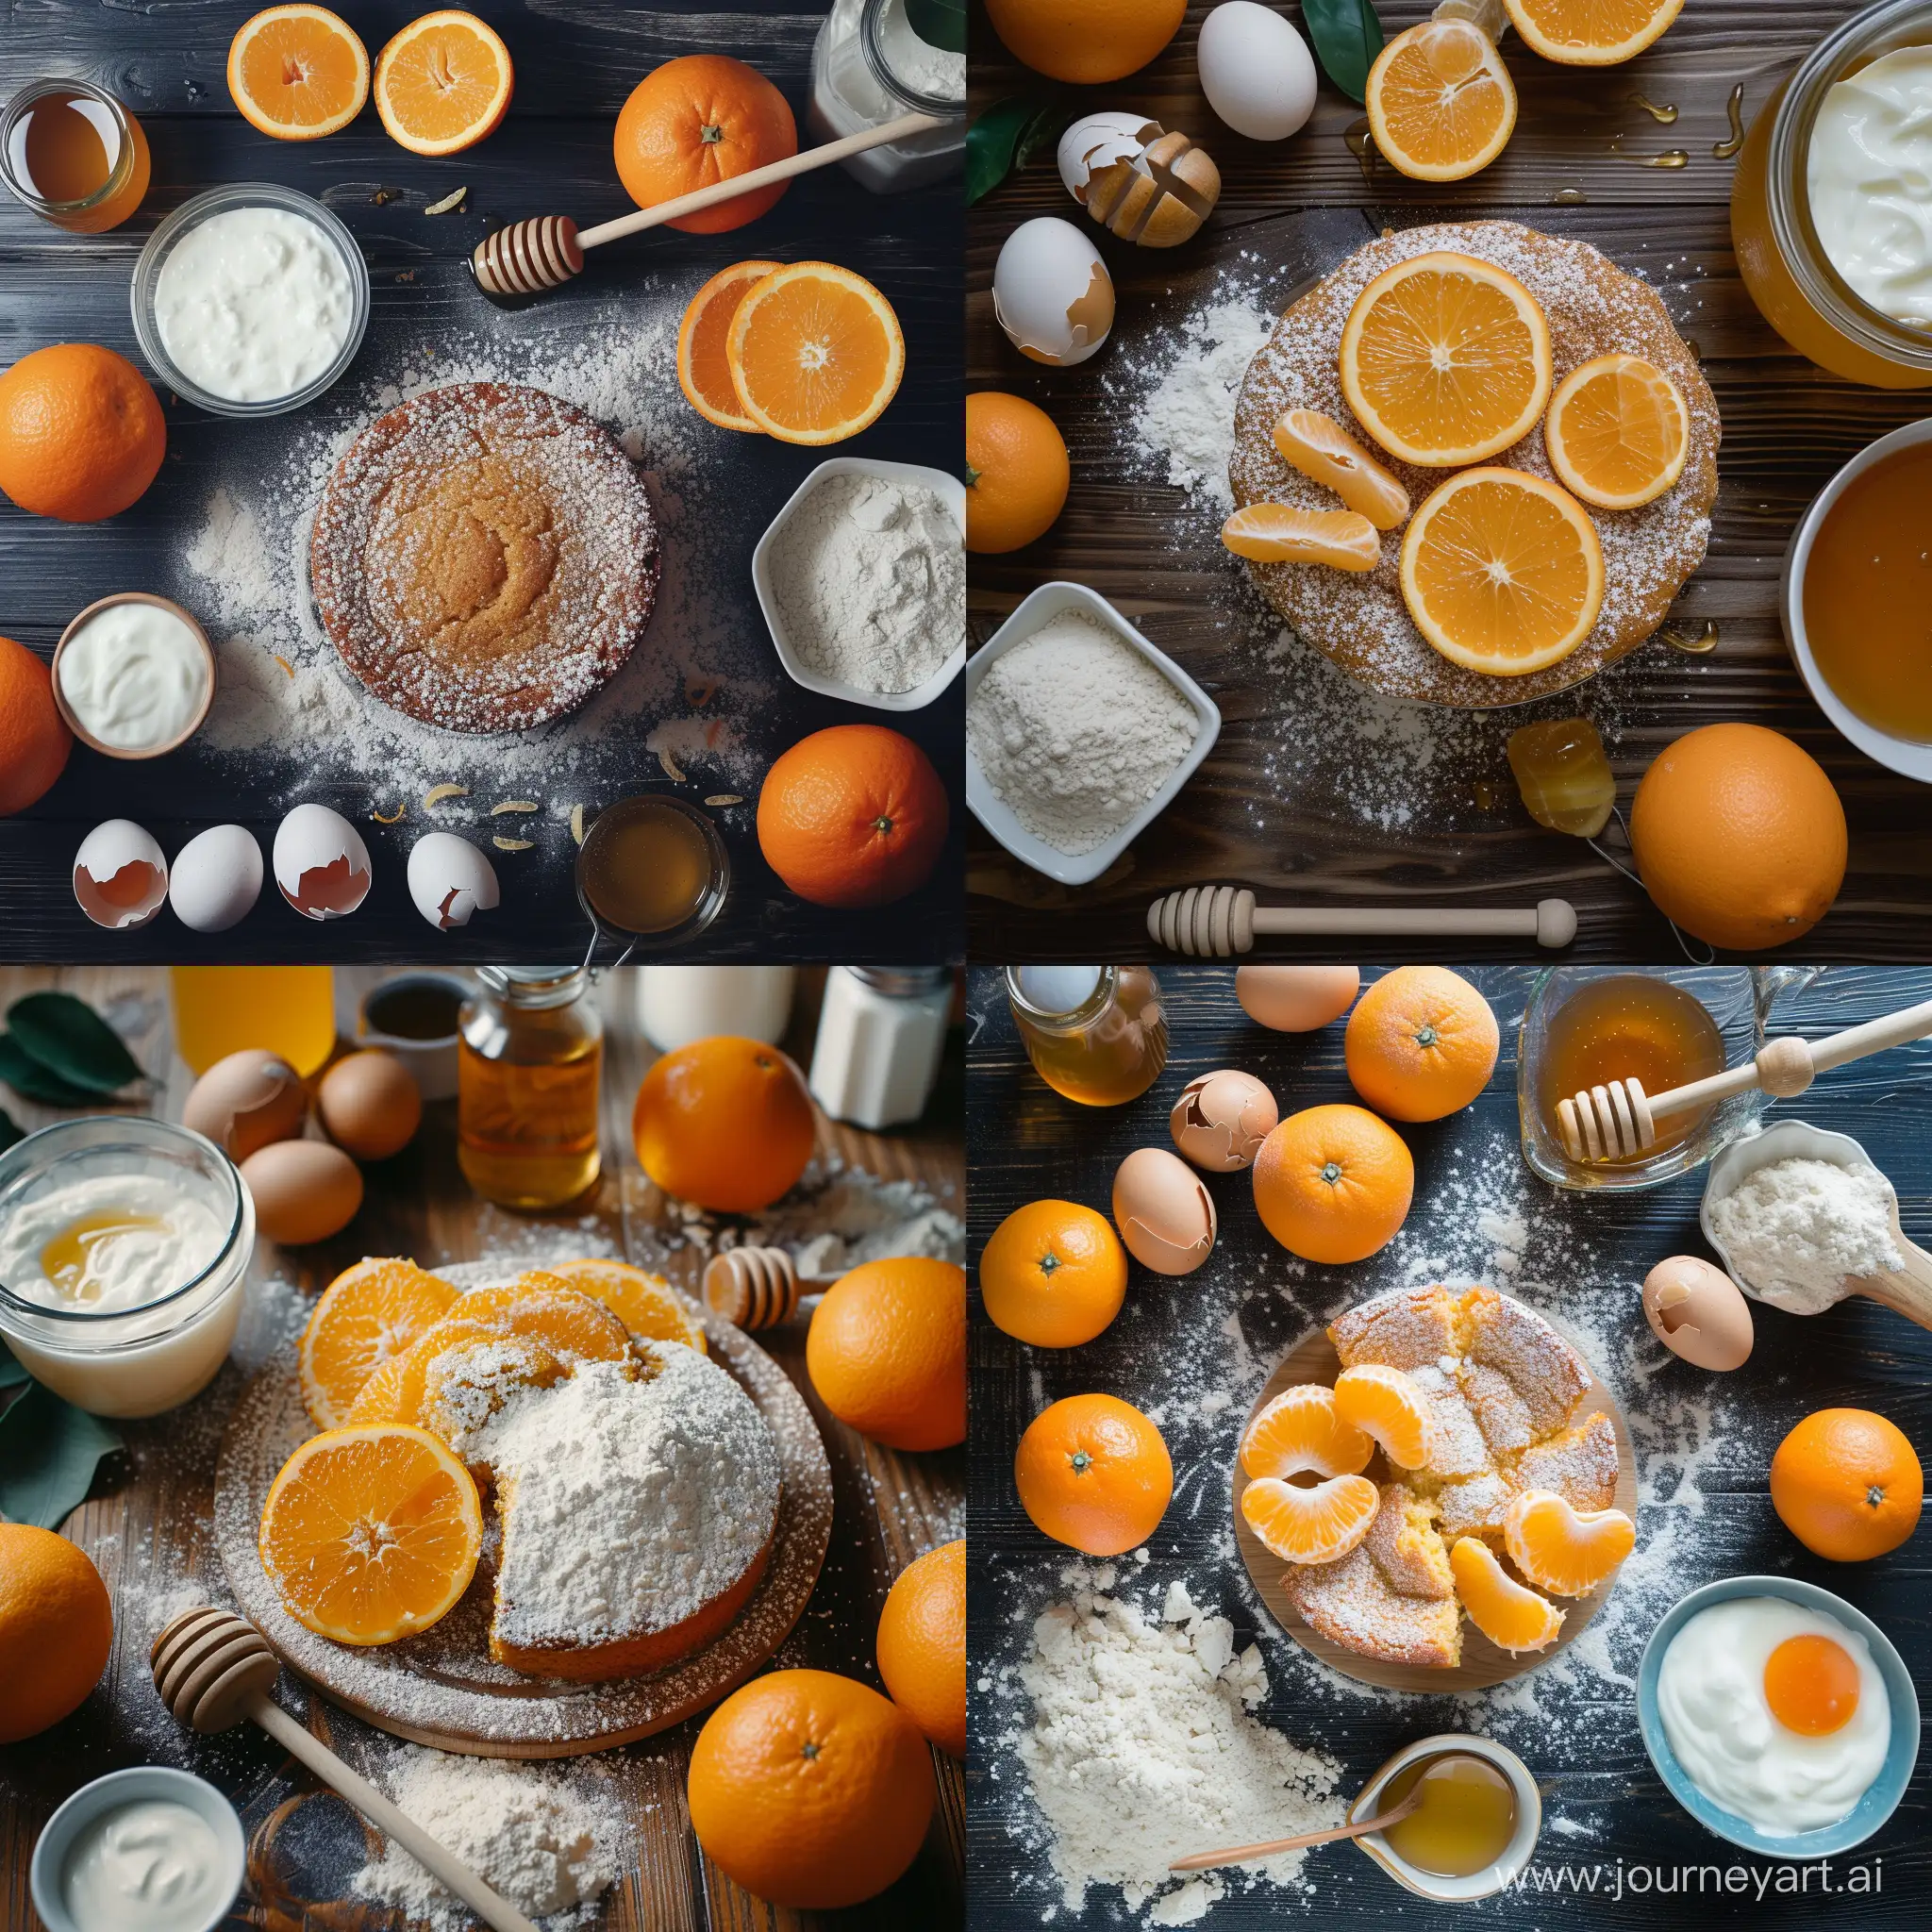 Natural and real photo of orange cake on the kitchen table. Natural lighting. There are some oranges, flour, eggs, yogurt, honey on the table.